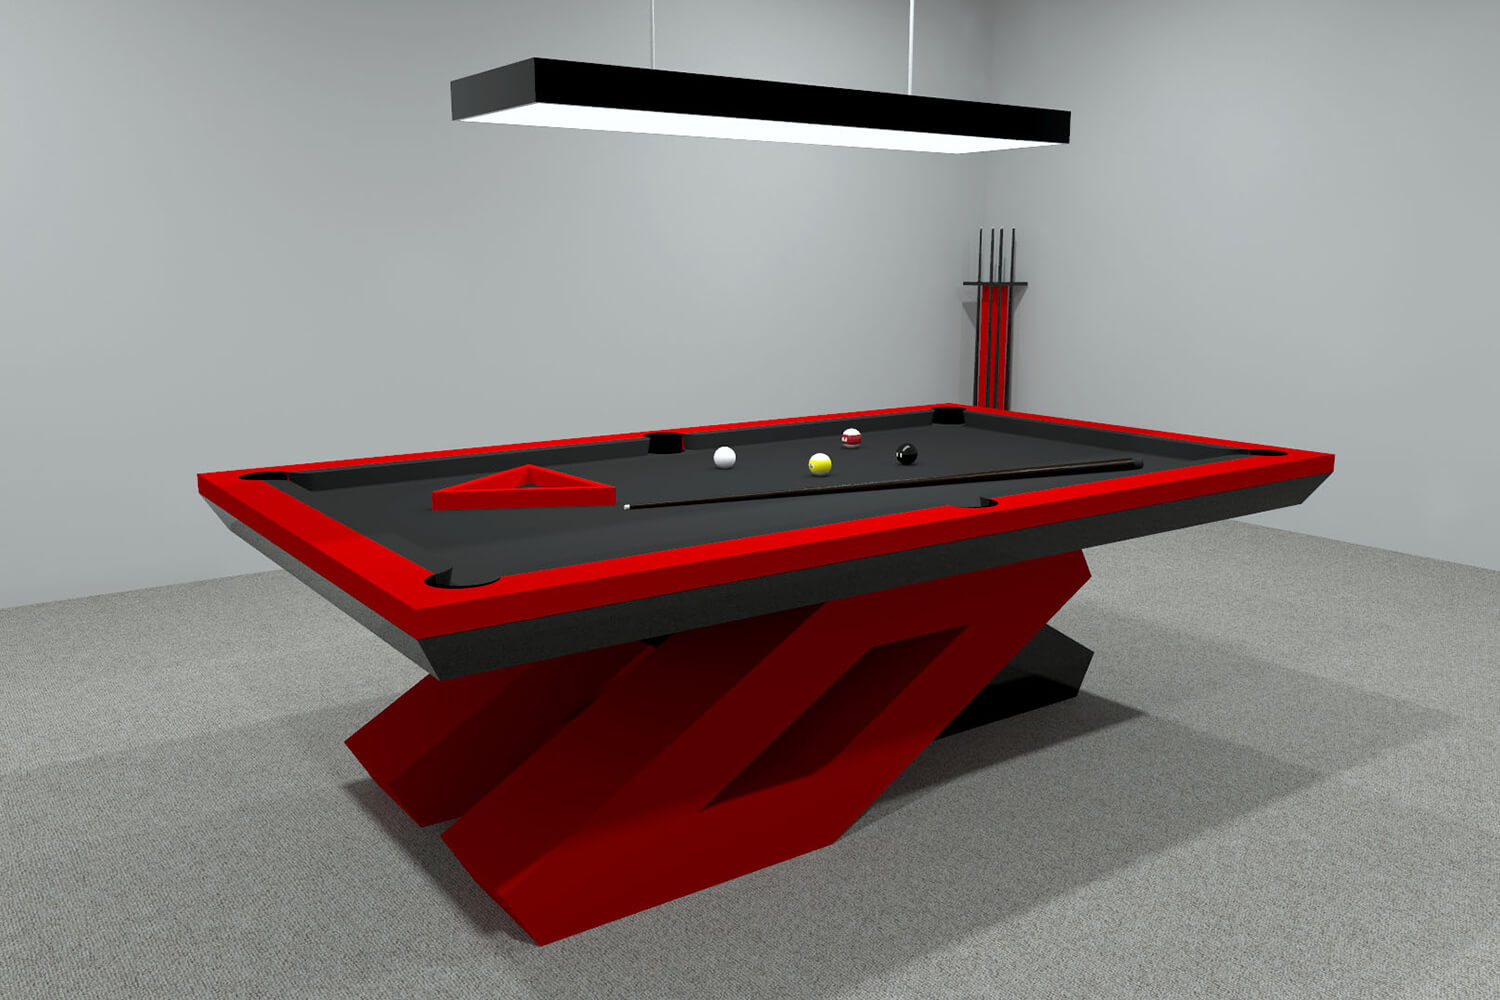 The Dozer Slate Bed Pool Table | Liberty Games